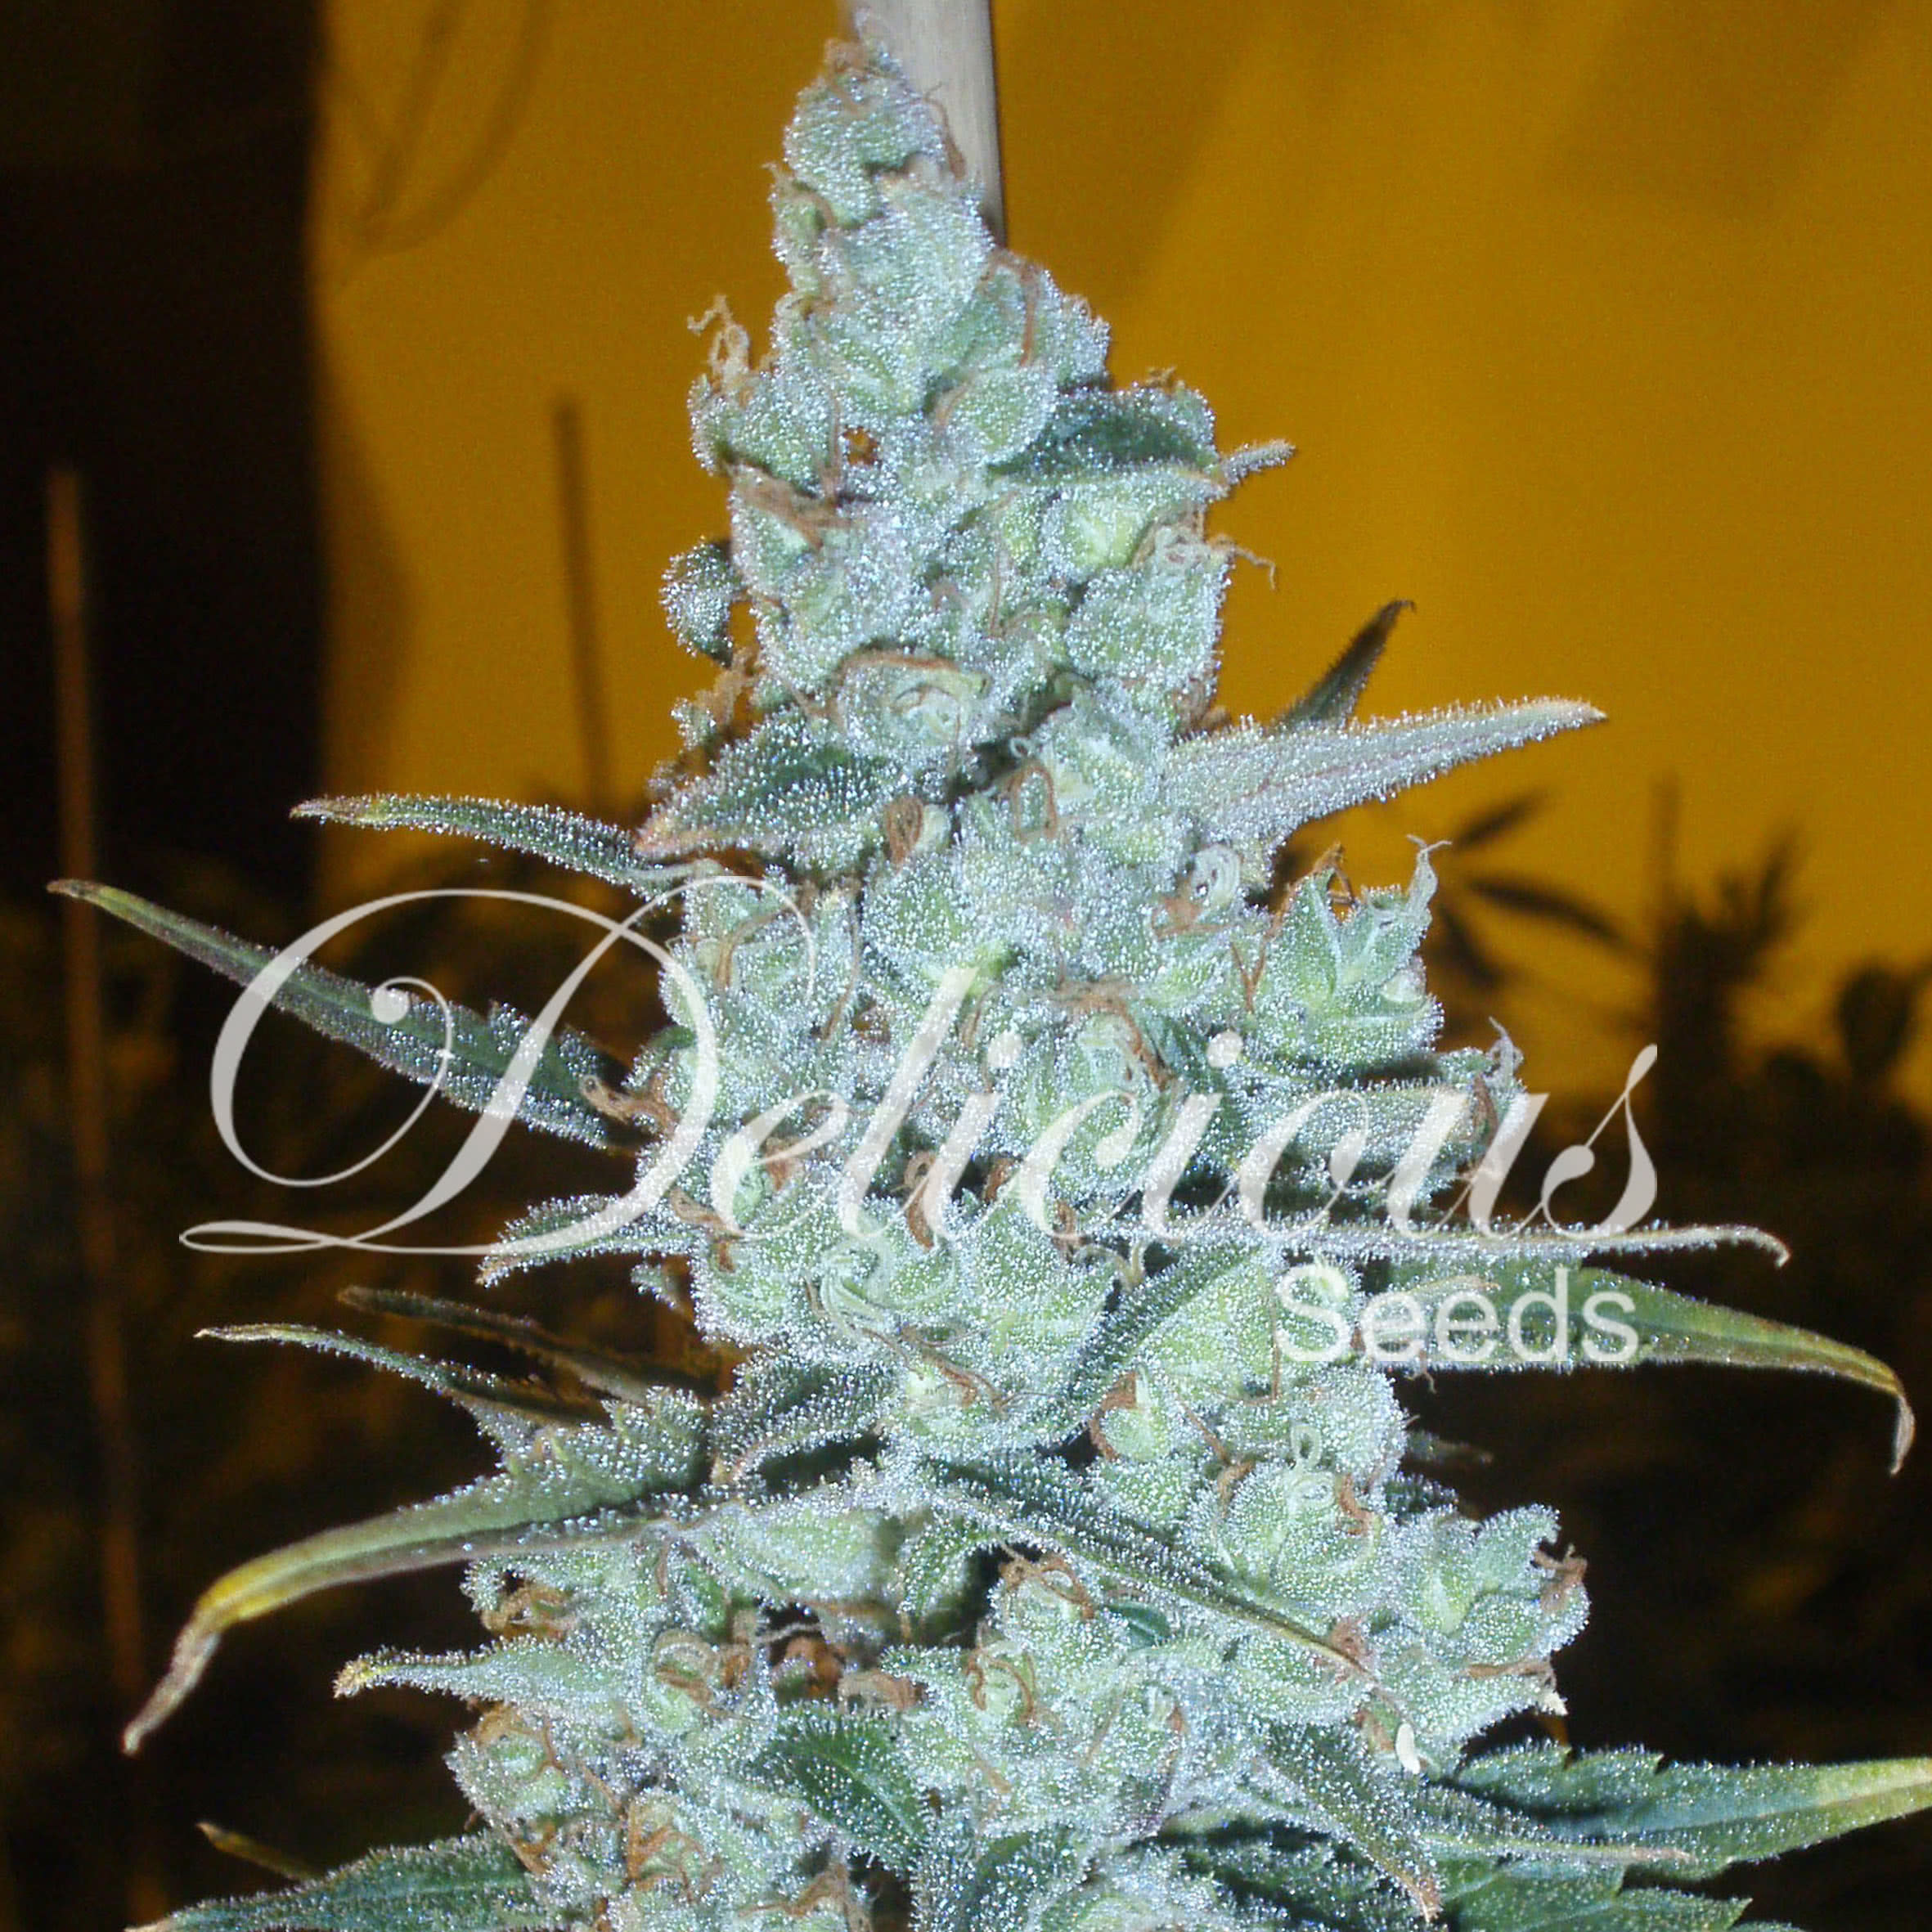 CRITICAL JACK HERER 100% (1) DELICIOUS